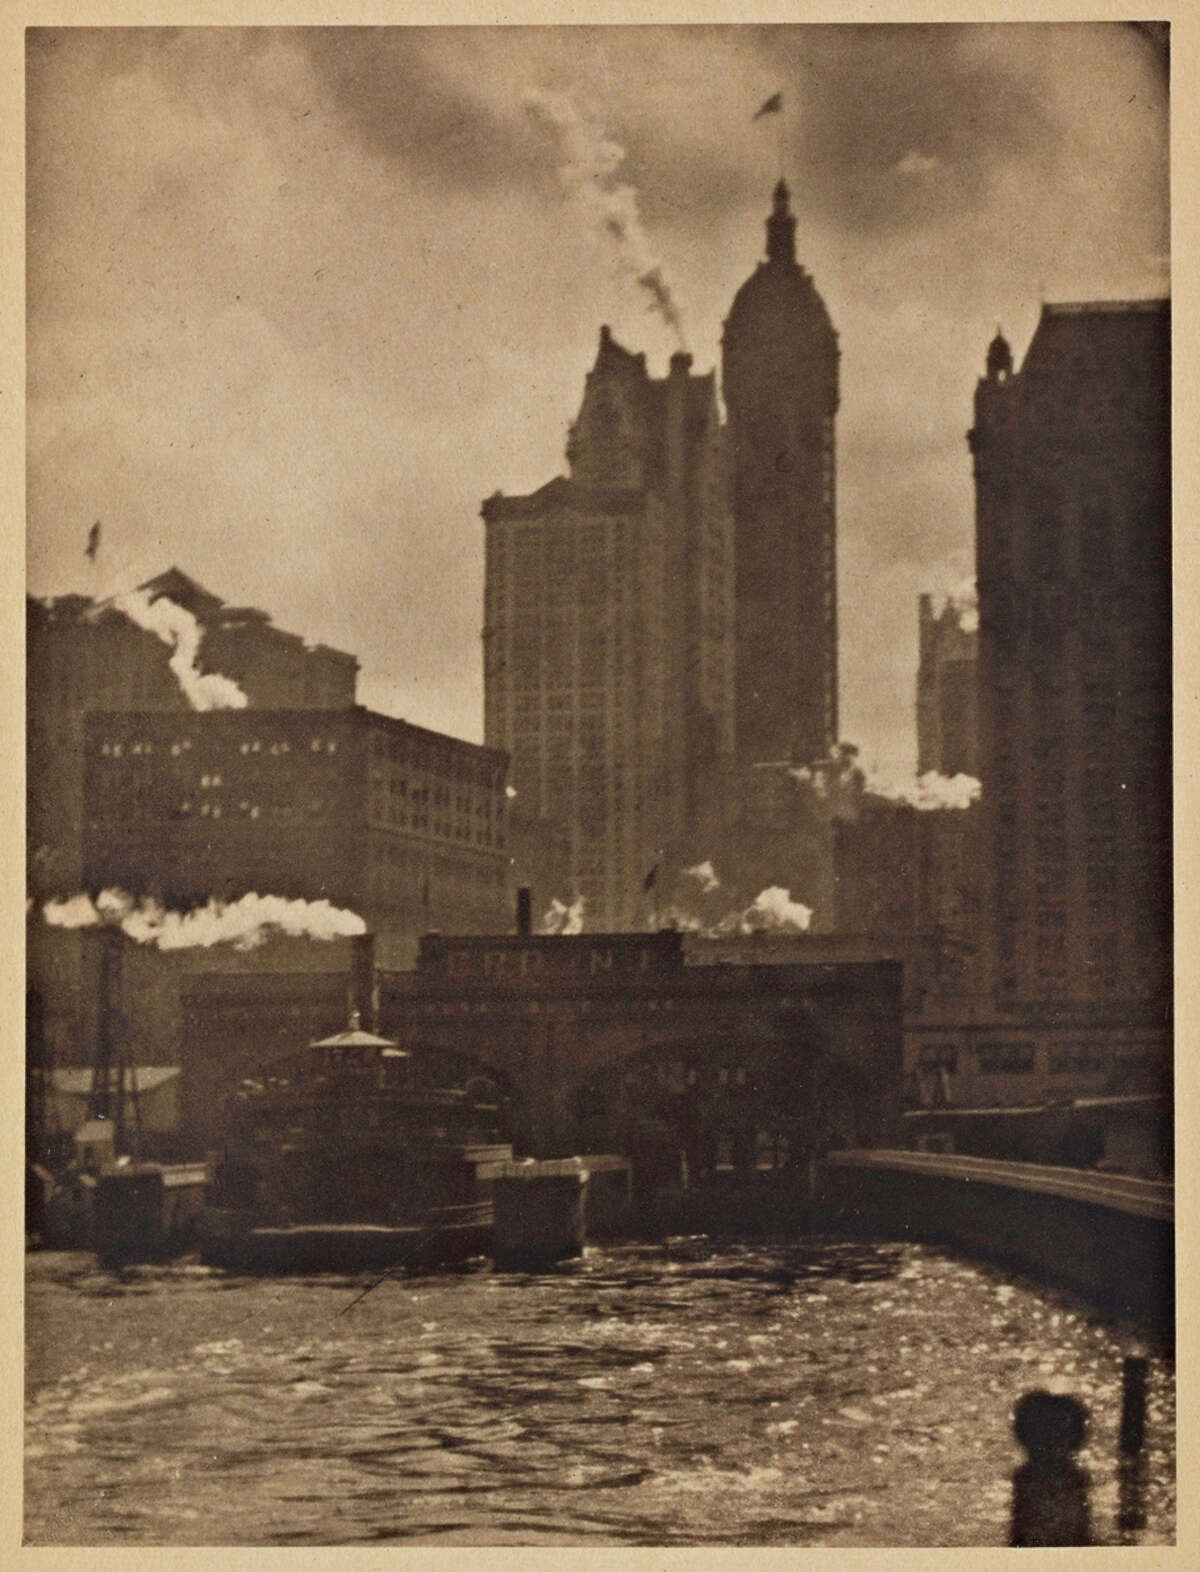 Alfred Stieglitz’s photograph “The City of Ambition” (1910) is part of “Modern Times,” a show exploring the relationship between Georgia O’Keeffe, her husband/mentor Stieglitz and their friend novelist Jean Toomer, at Cantor Arts Center.